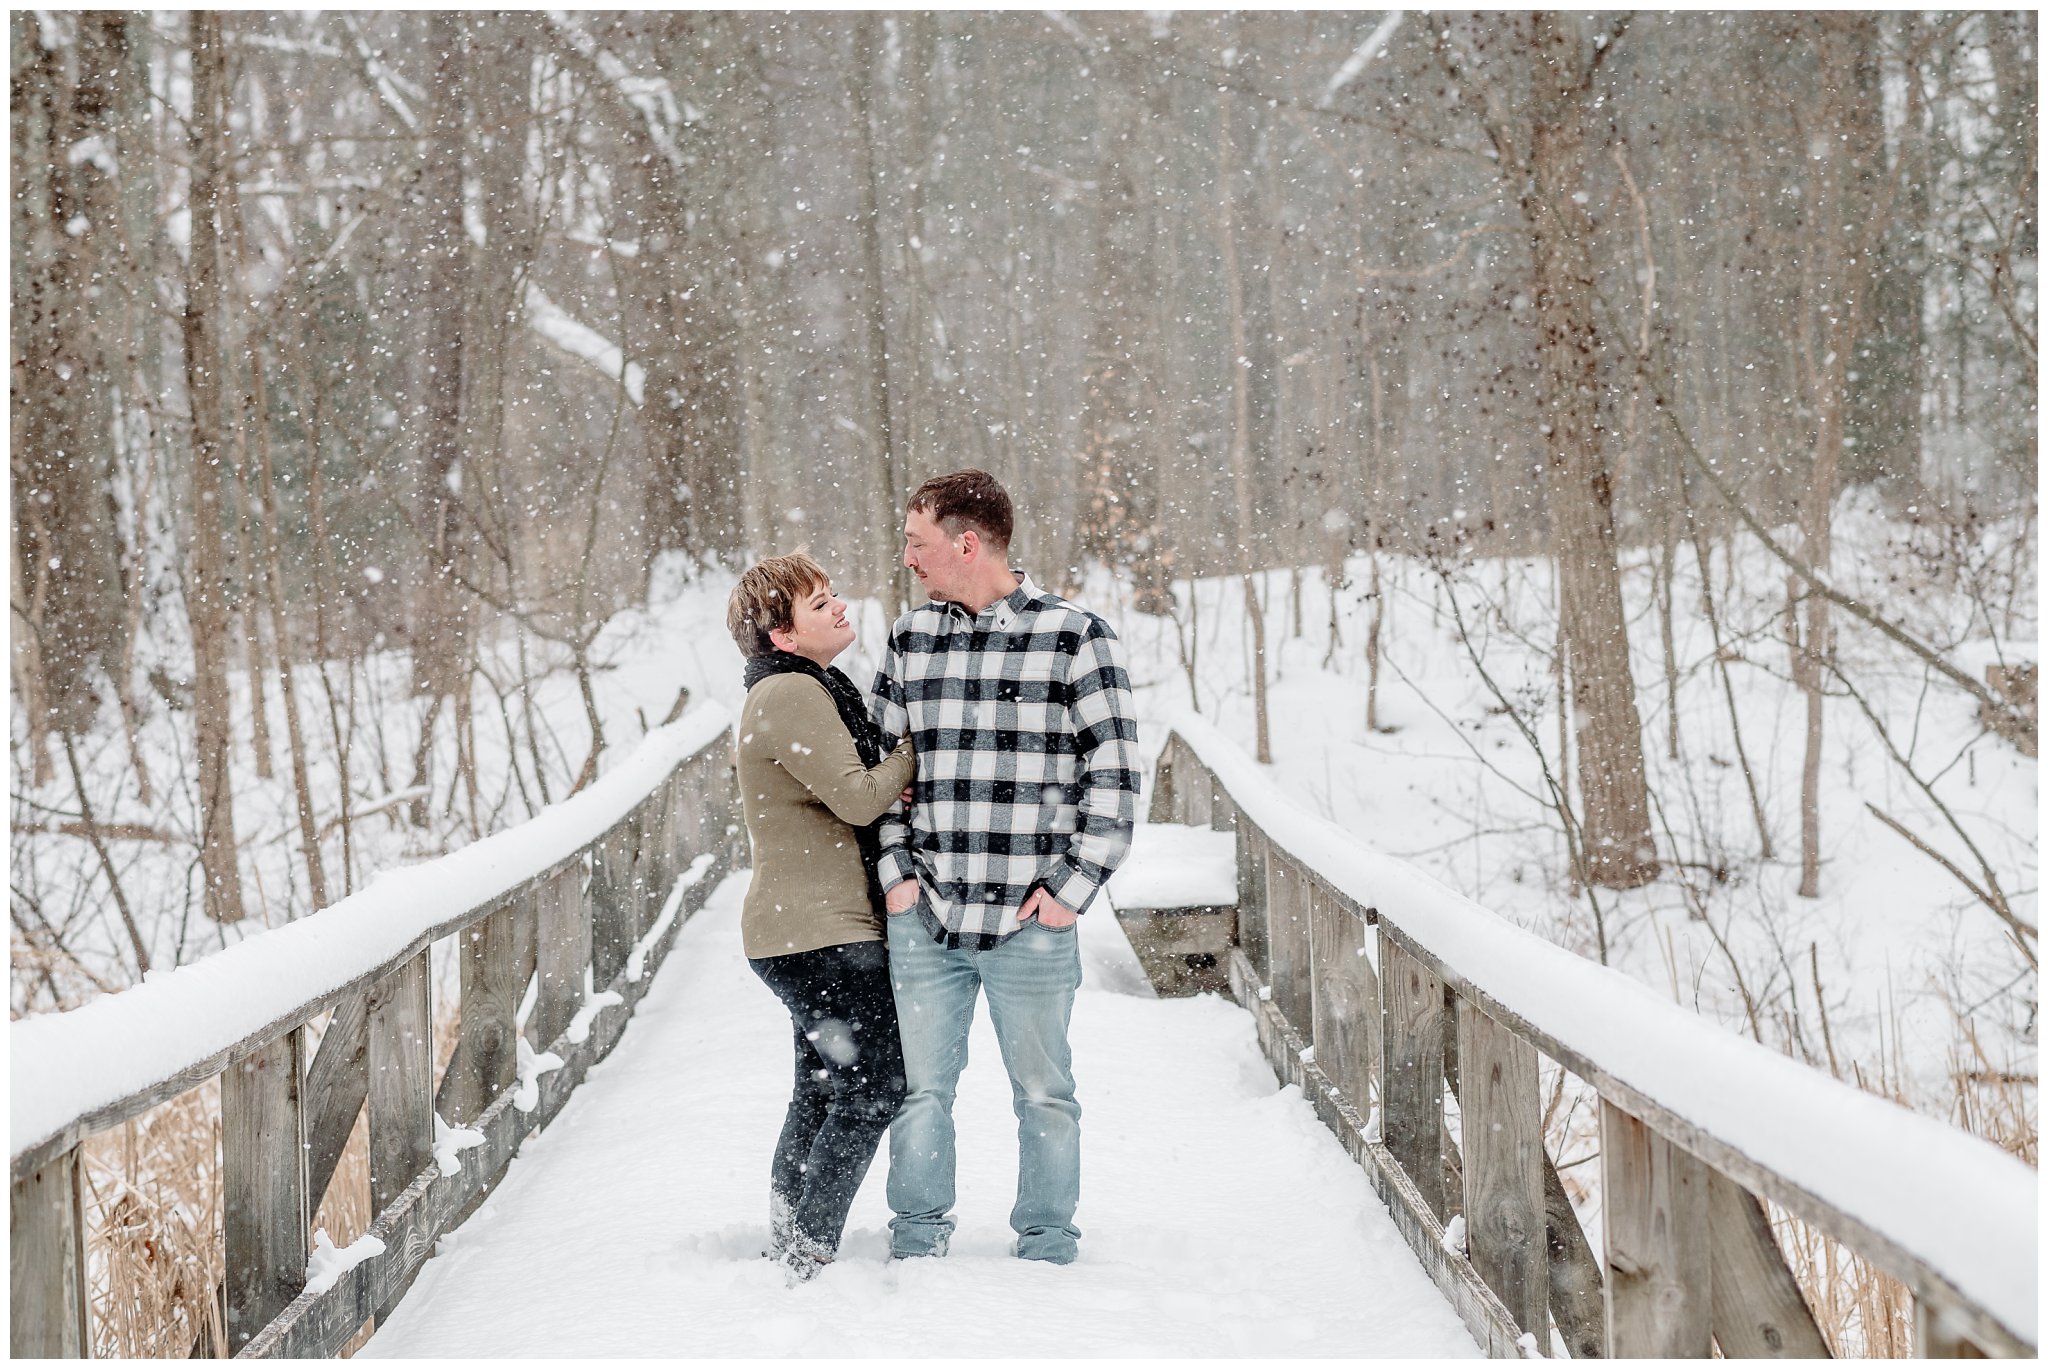 Engaagement Photographer,Engagement Session,Joanna Young Photography,Lake Ontario Engagement Session,Oswego Engaegment Session,Oswego Photographer,Syracuse Photographer,Syracuse Wedding Photographer,Winter Engagement Ideas,Winter Engagement Session,